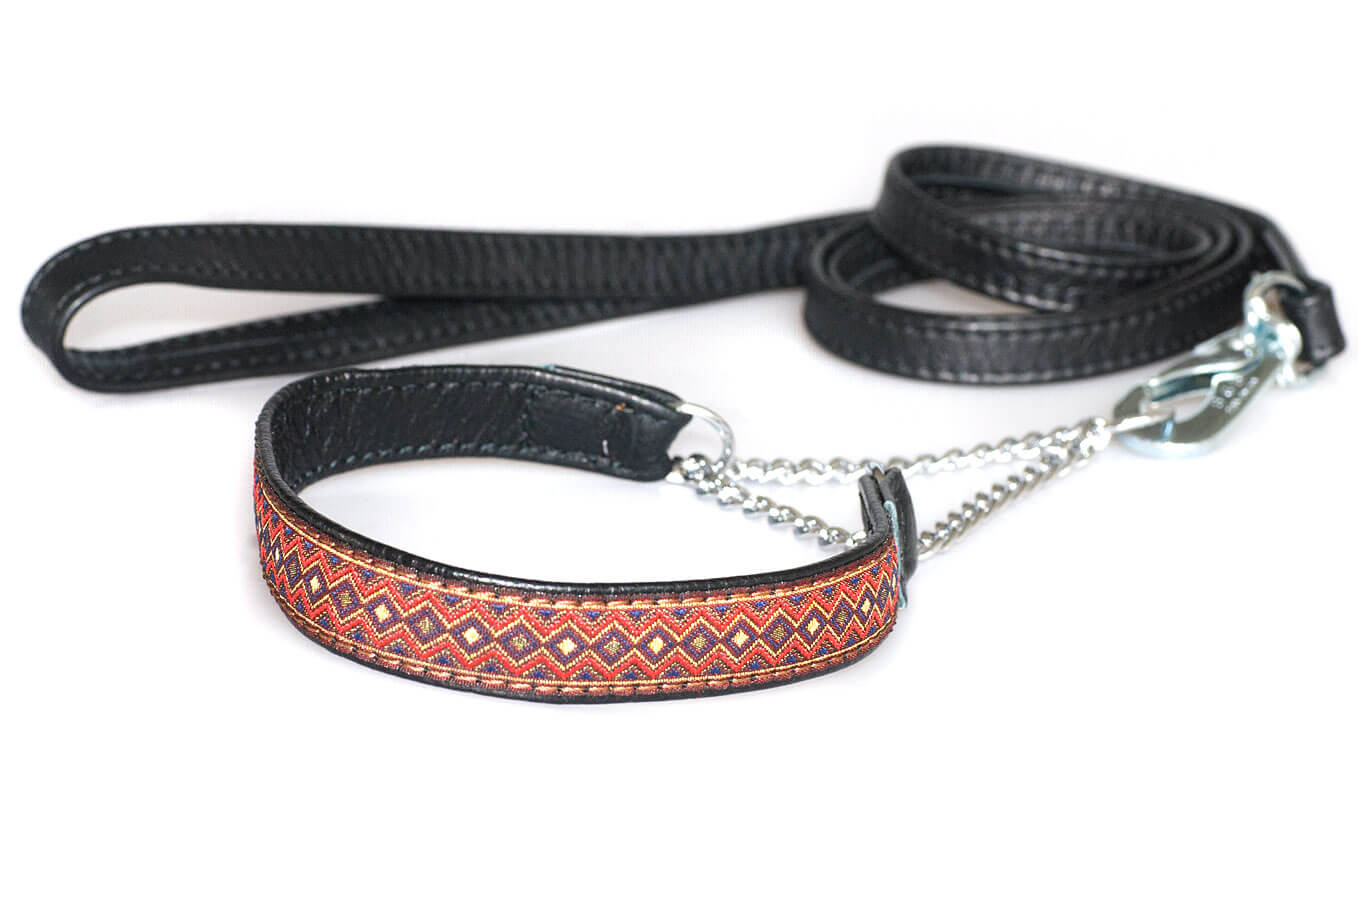 Black nappa leather double stitched lead to match ribbon collars